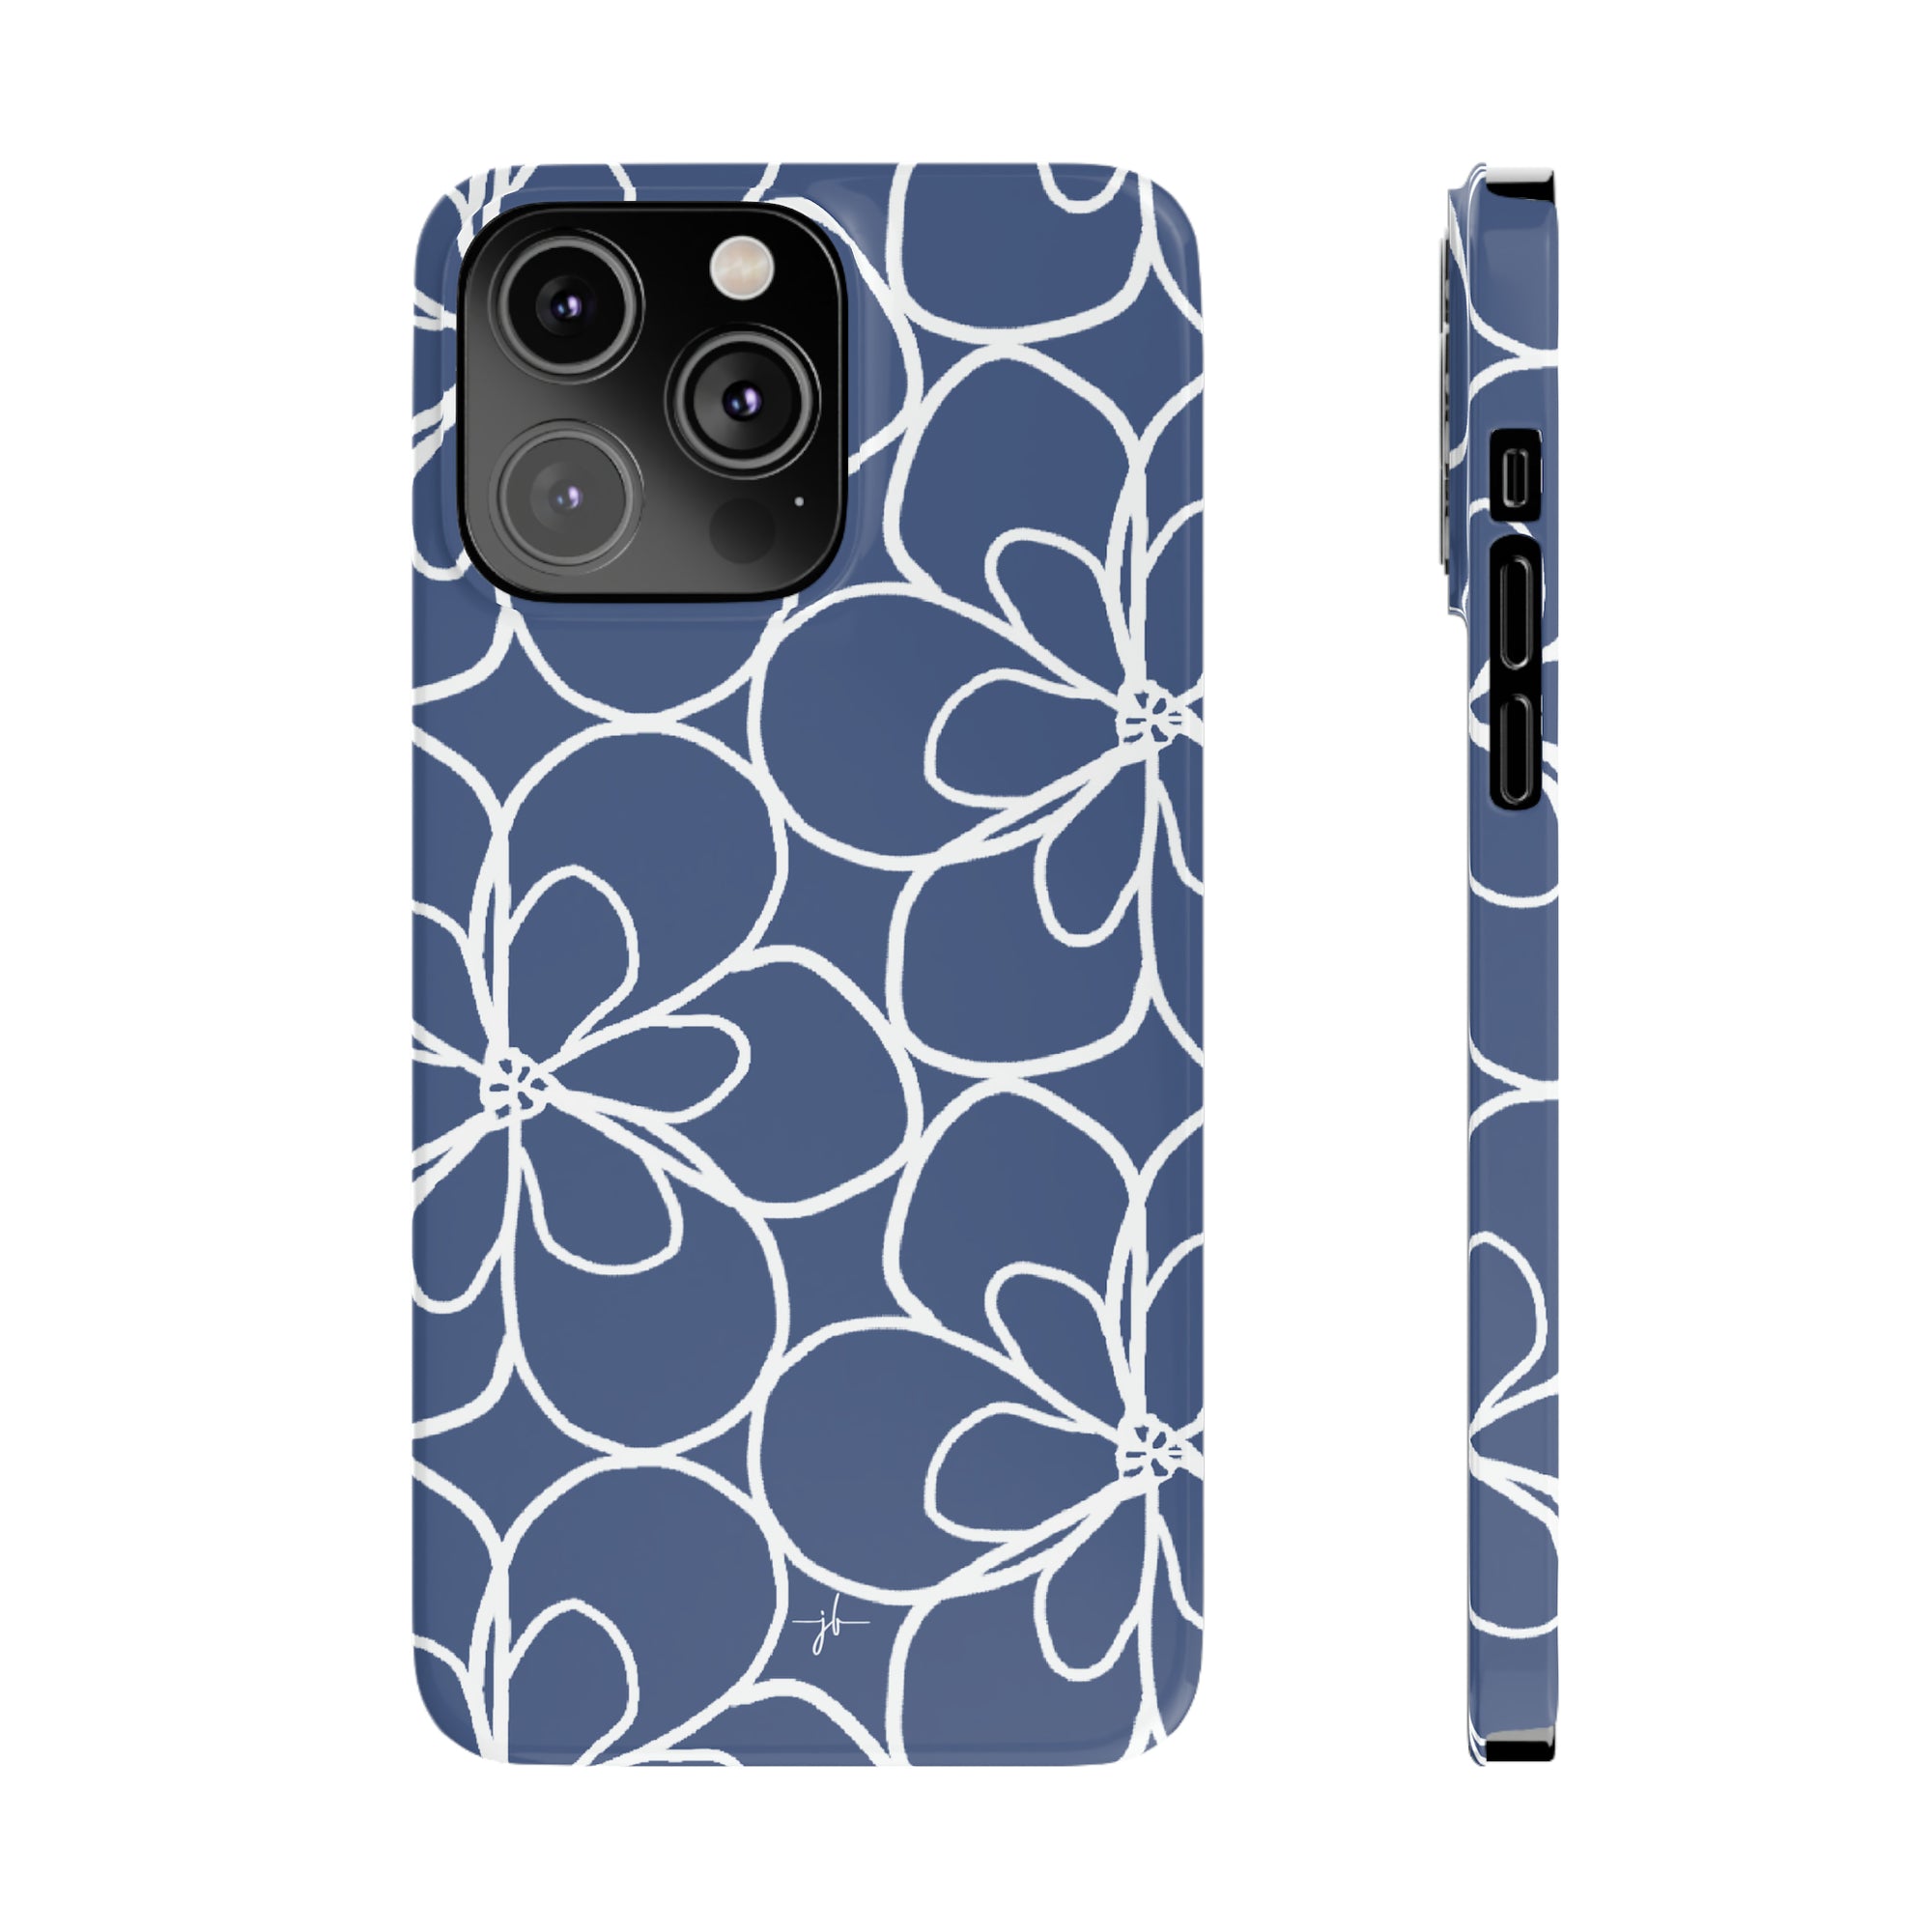 iPhone case from front and side with blue background and white floral pattern